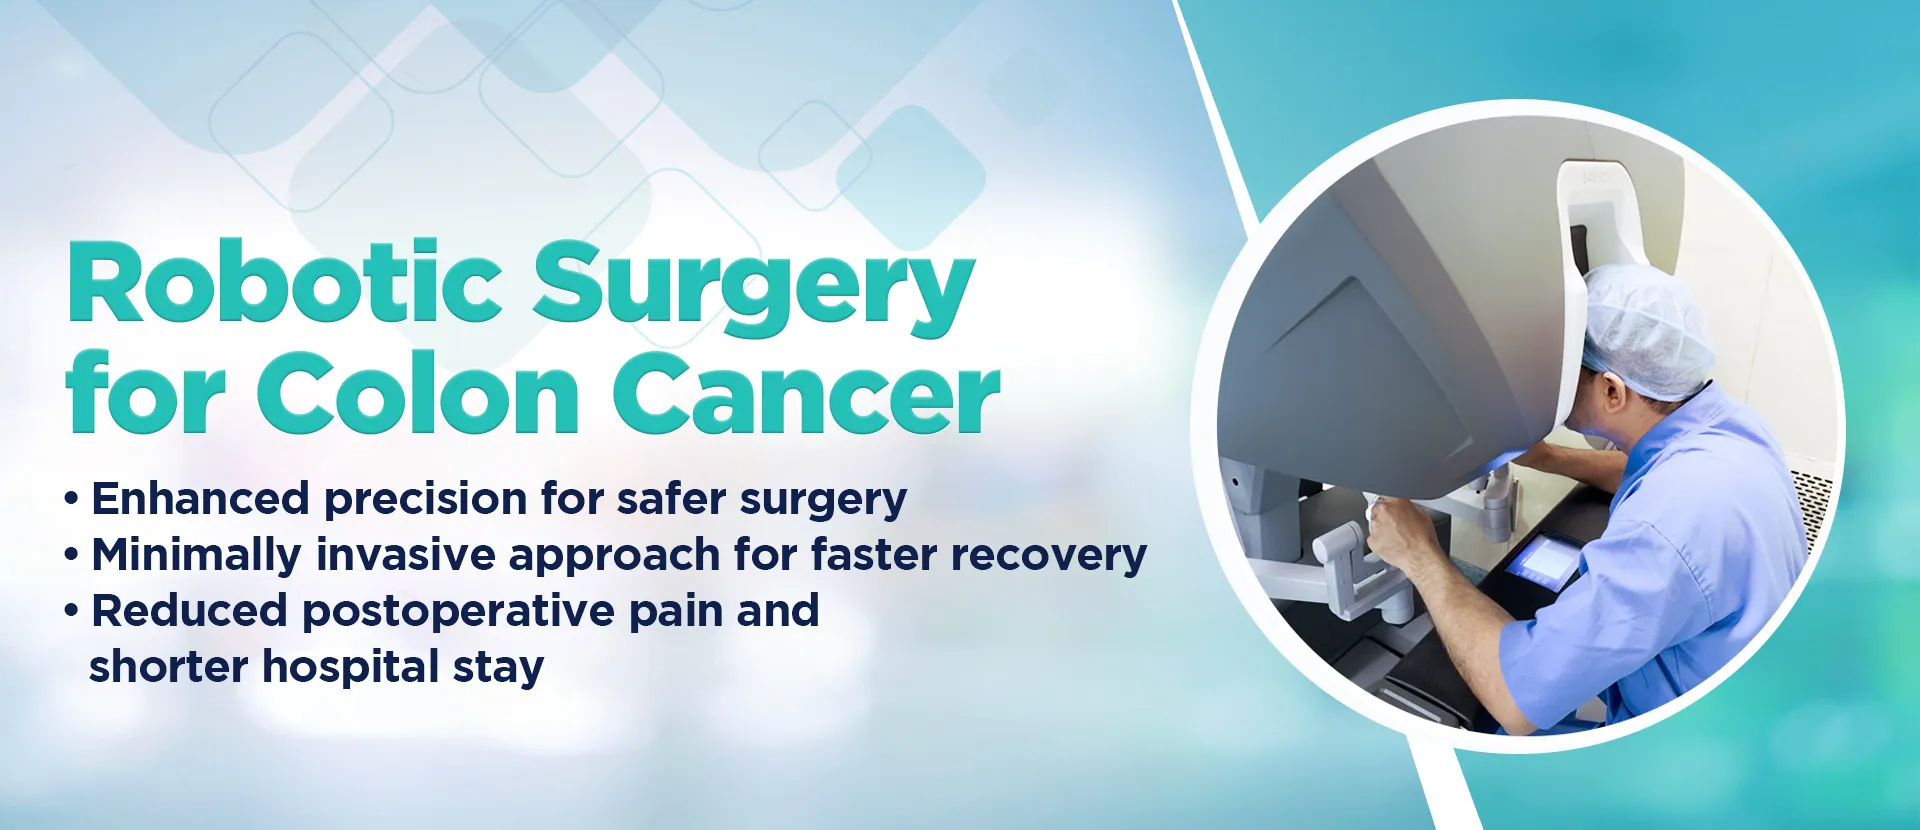 Robotic surgery for colon cancer in Ahmedabad